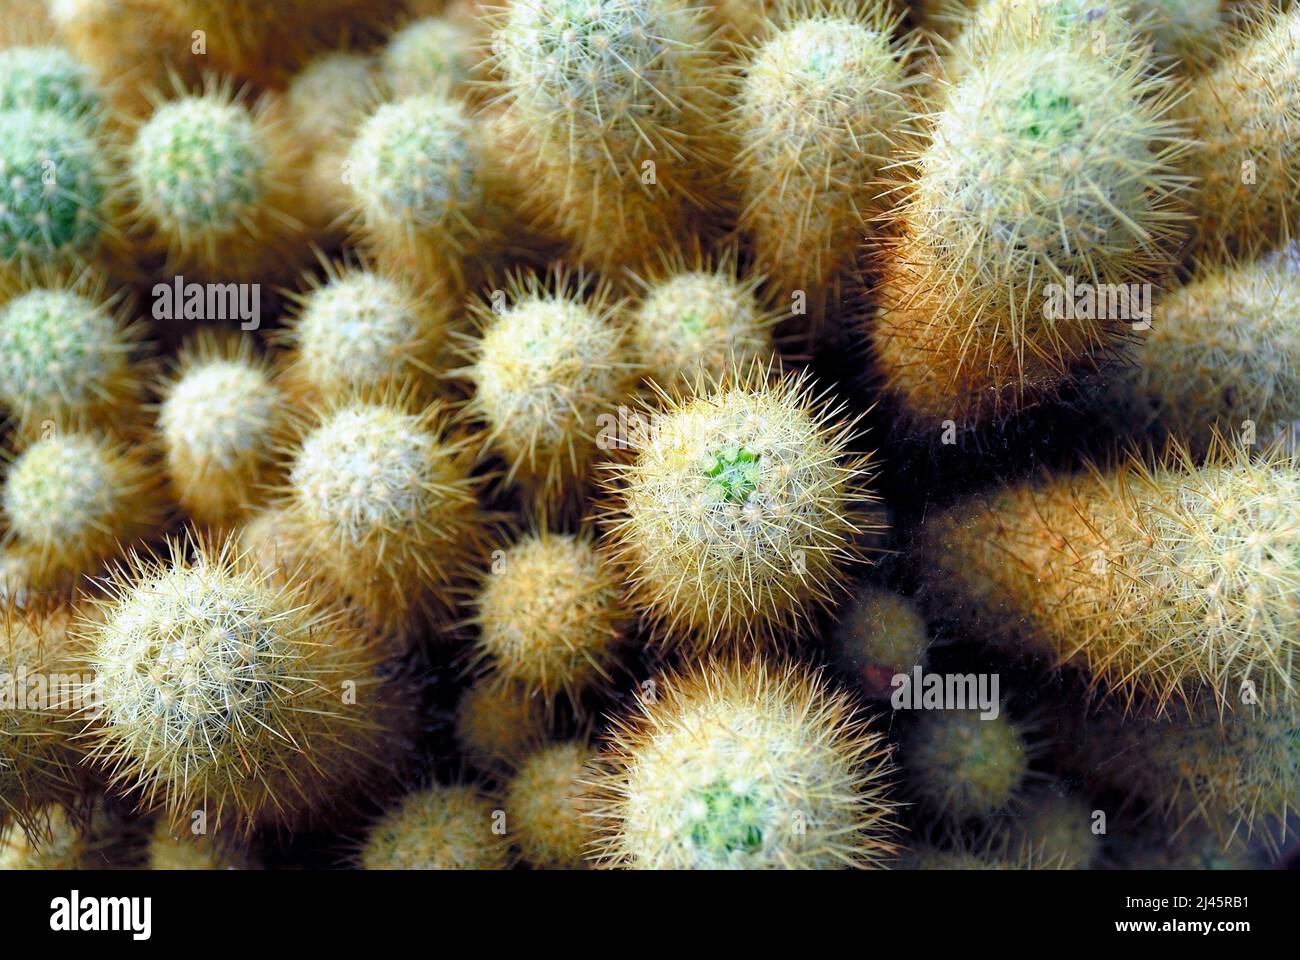 A gold lace cactus in flowerpot Stock Photo